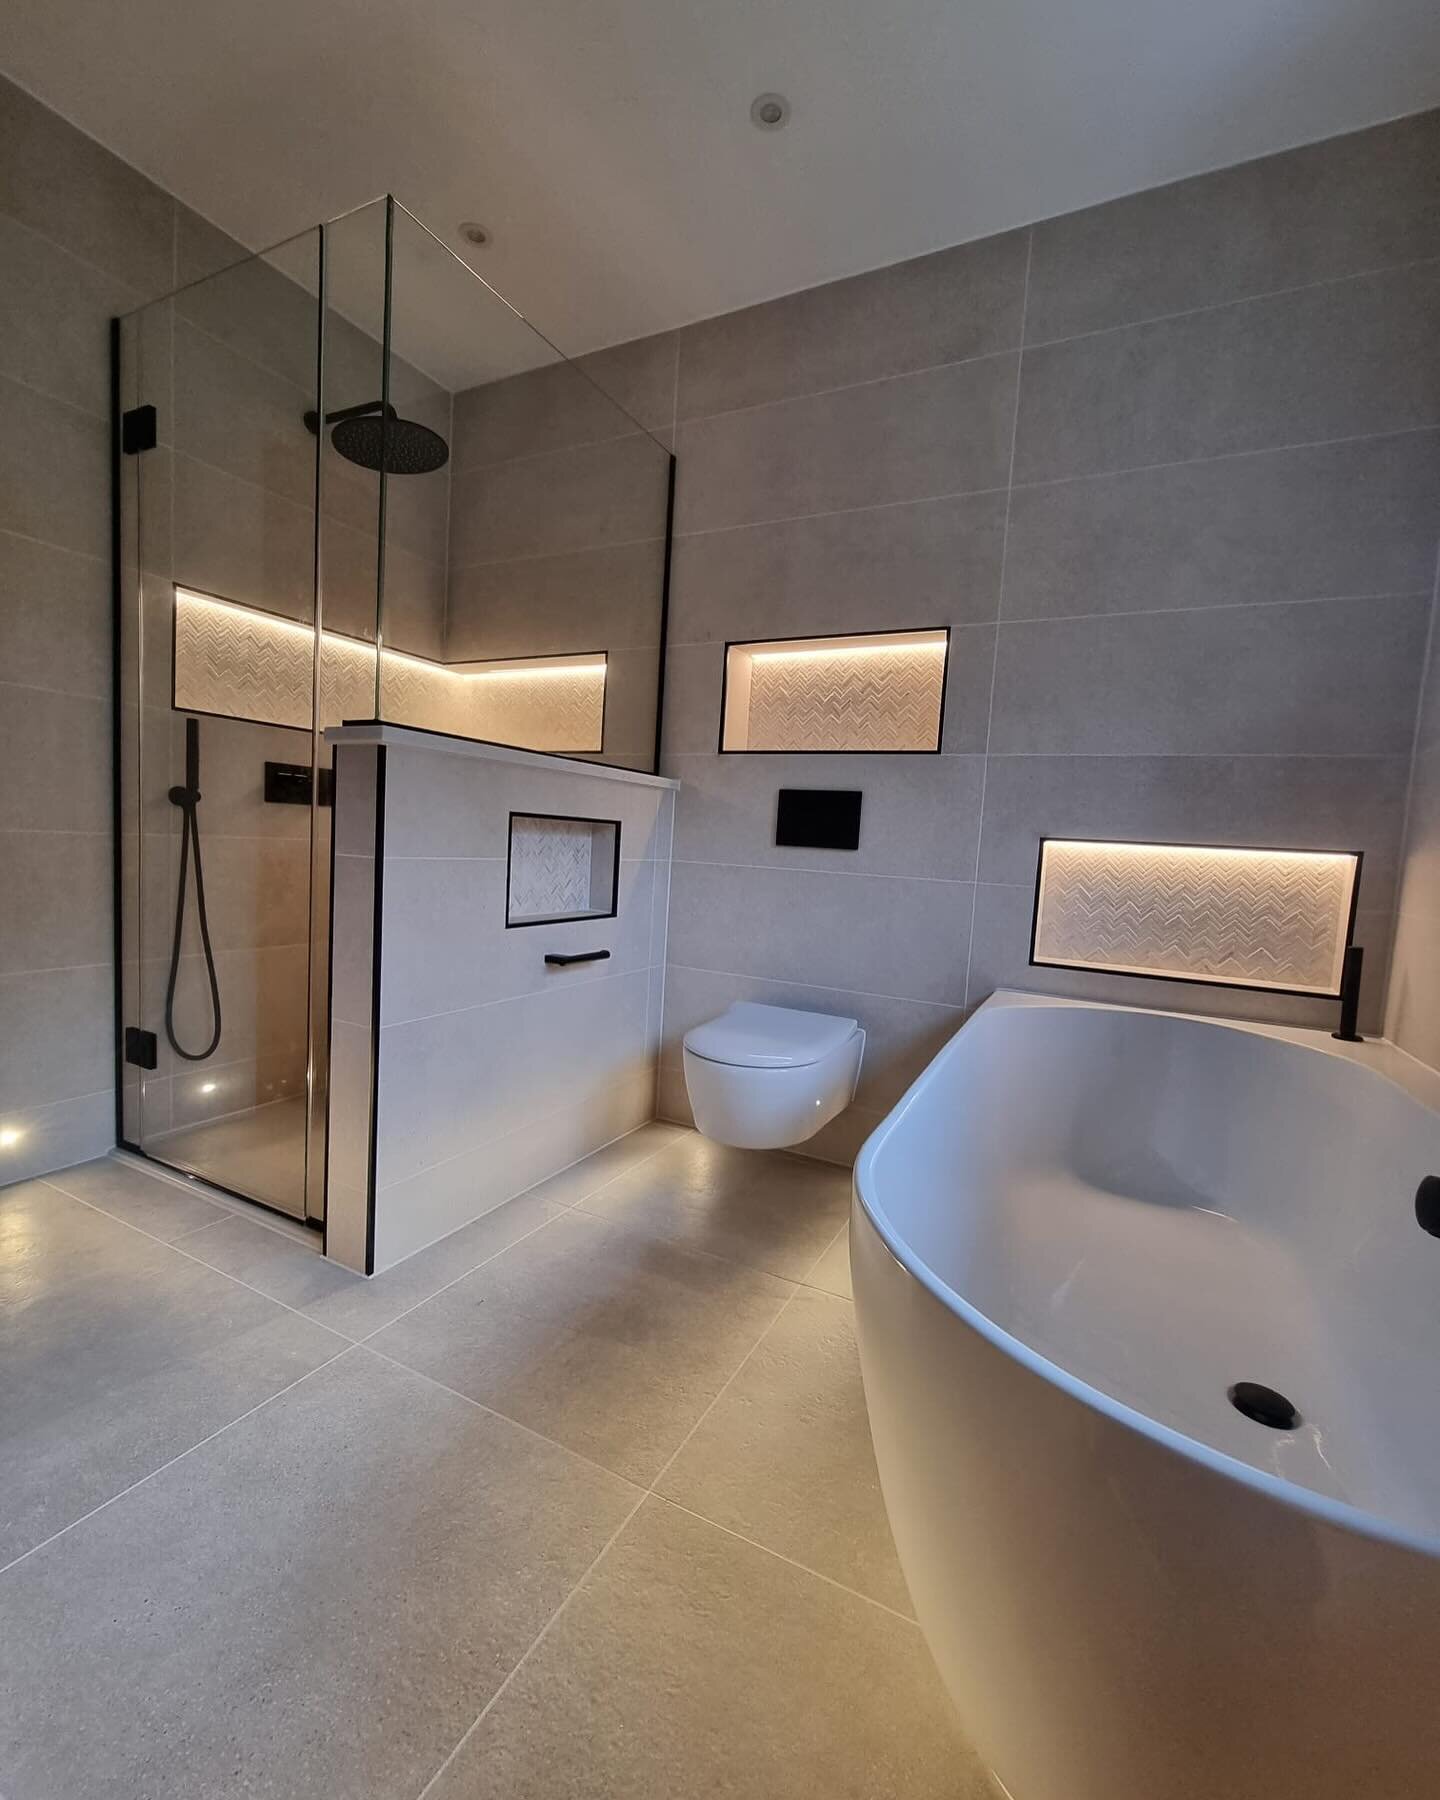 Bourneside have been involved in a lot of bathrooms over the years and this one has got to be up there as one of the best 😍😍

Thank you for the opportunity @three3oneltd! The level of detail in this room is insane 💪🏽💪🏽

Shout out to @fossled fo